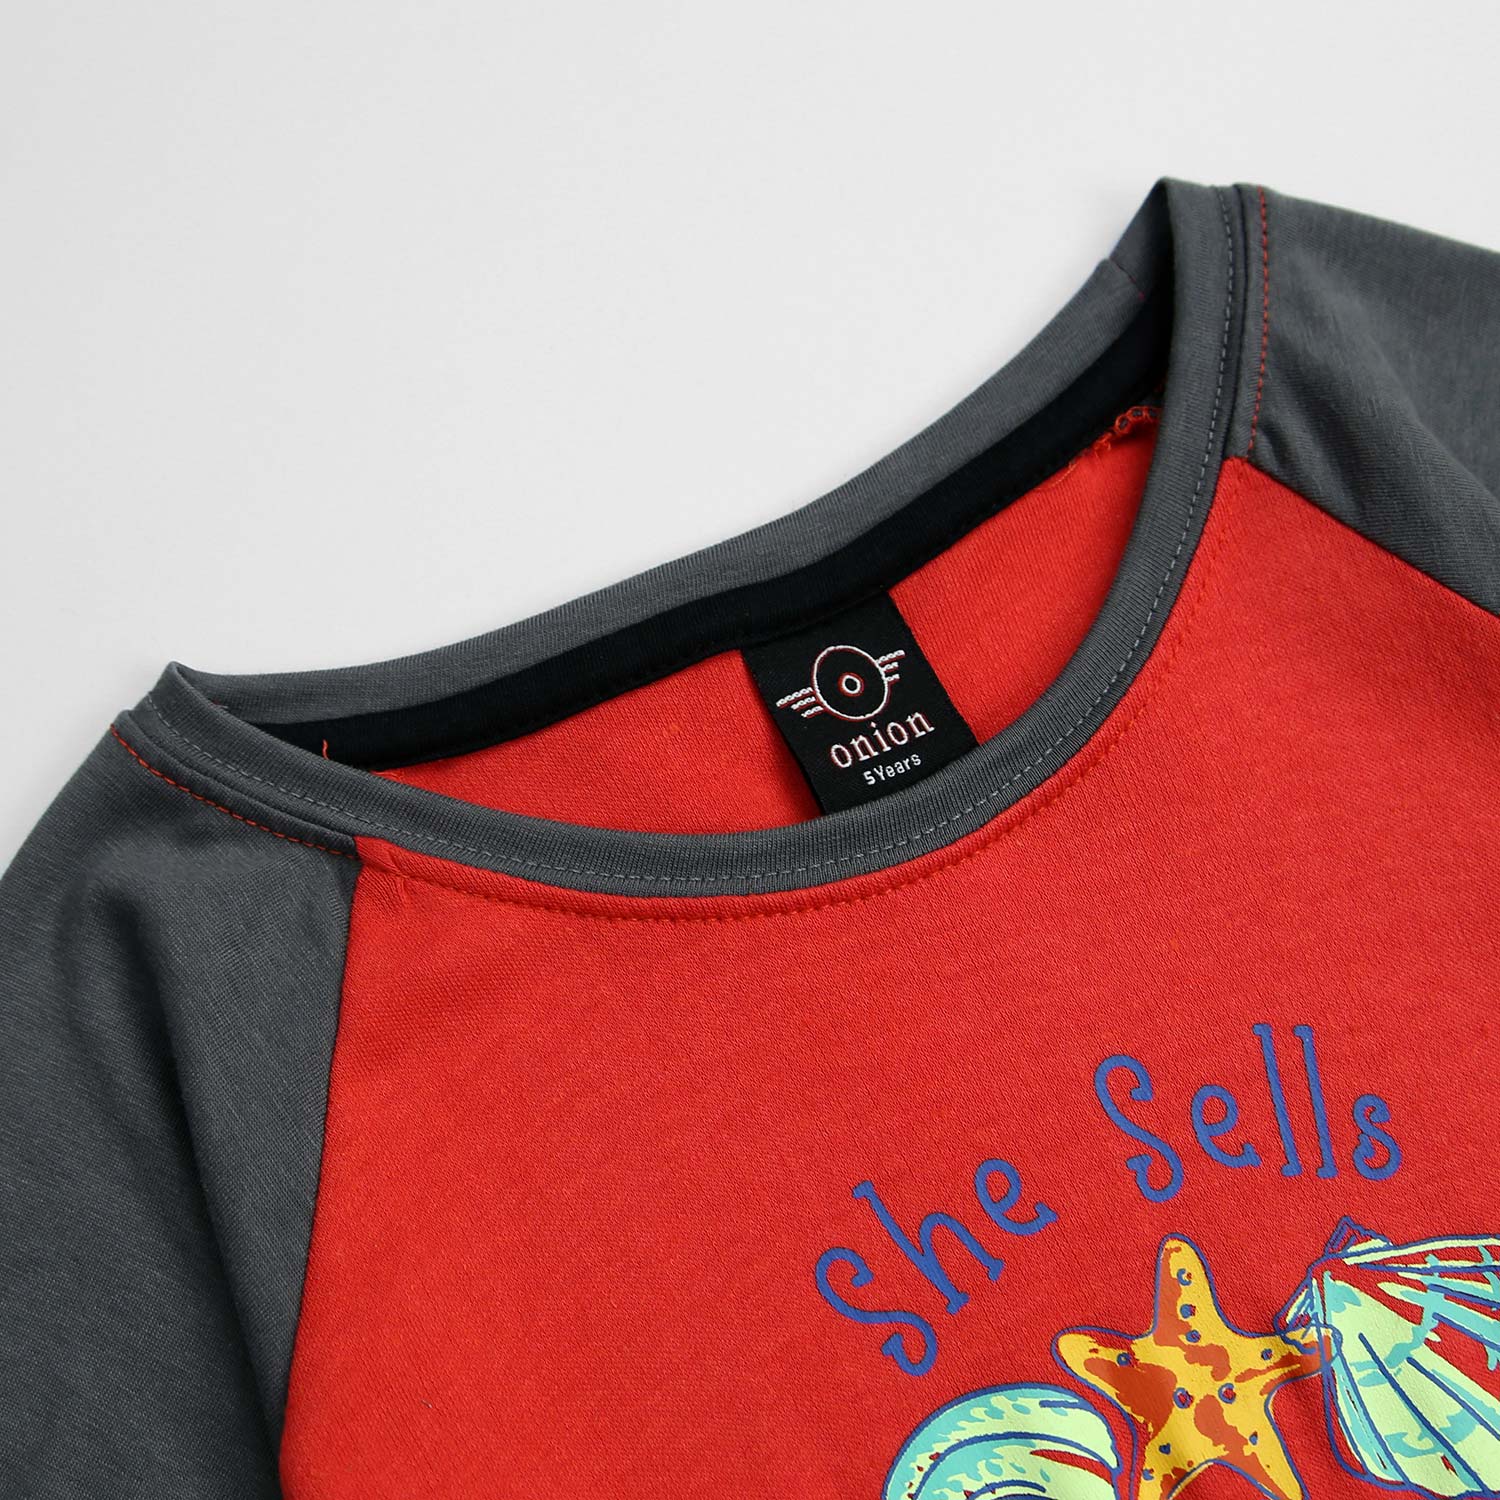 Girls Pure Cotton "She Sells" Graphic T-shirt Frock